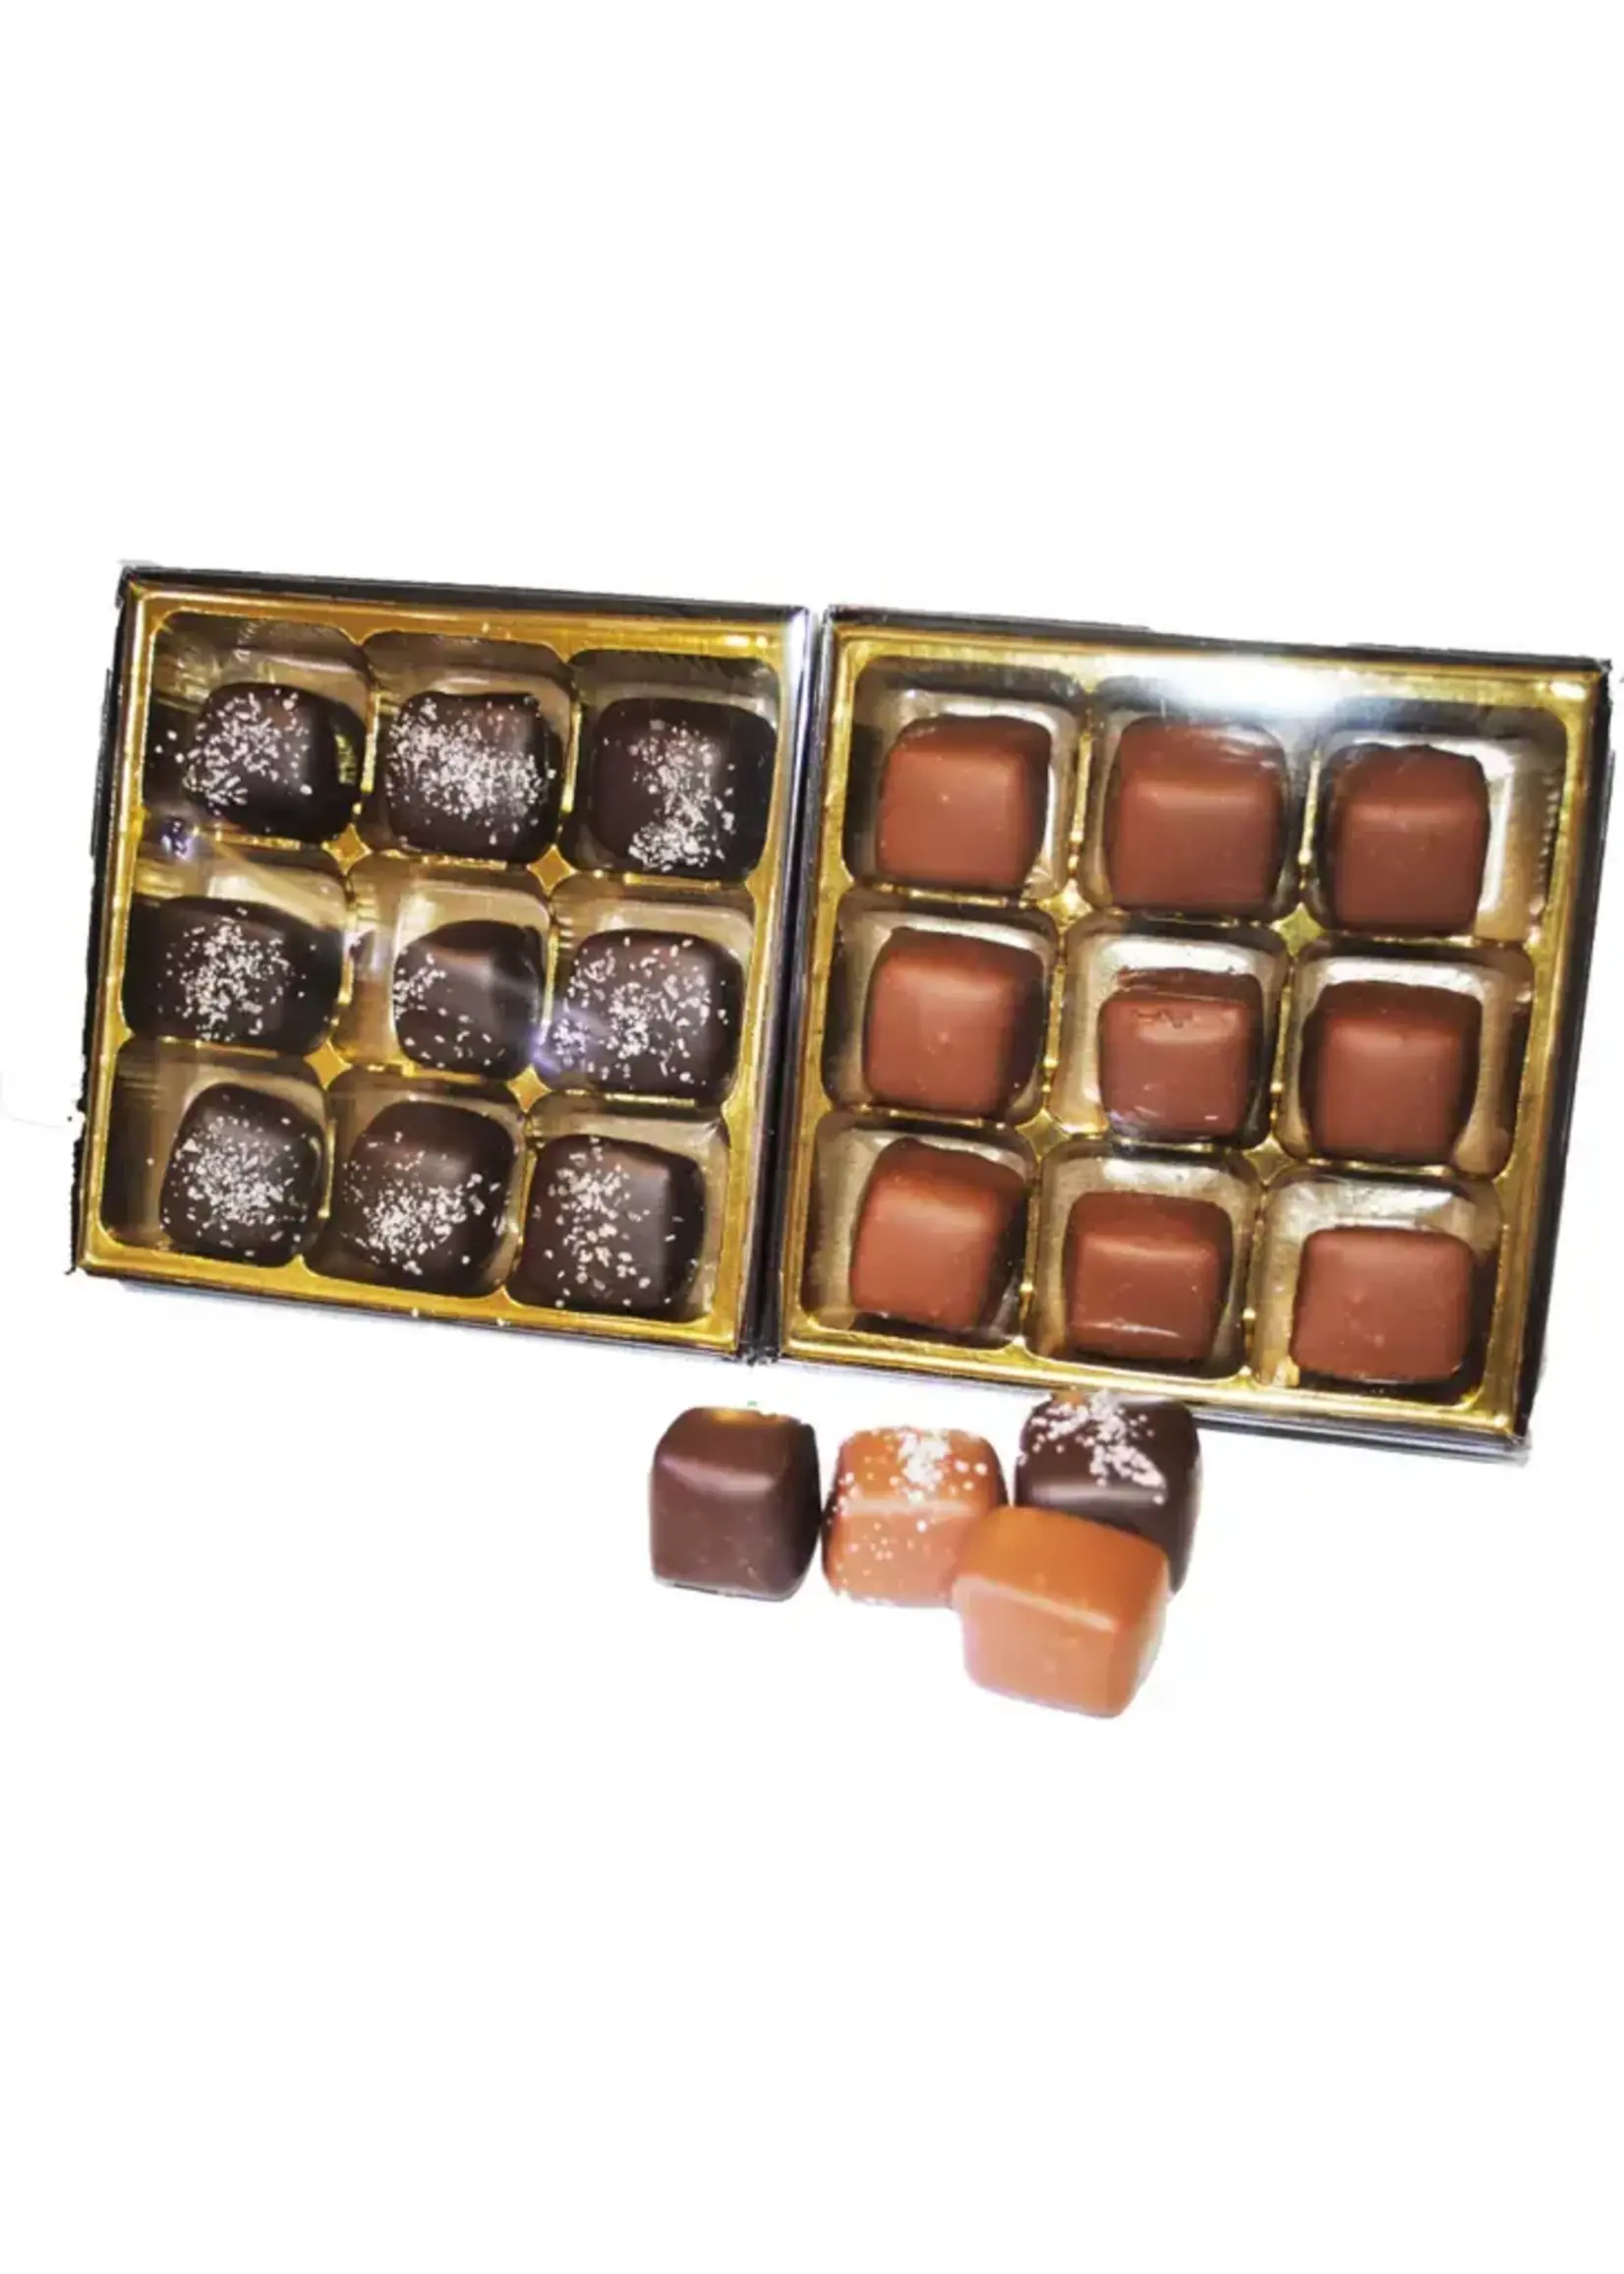 Skip's Candies Caramels 9 count Gift Box - Nut Free